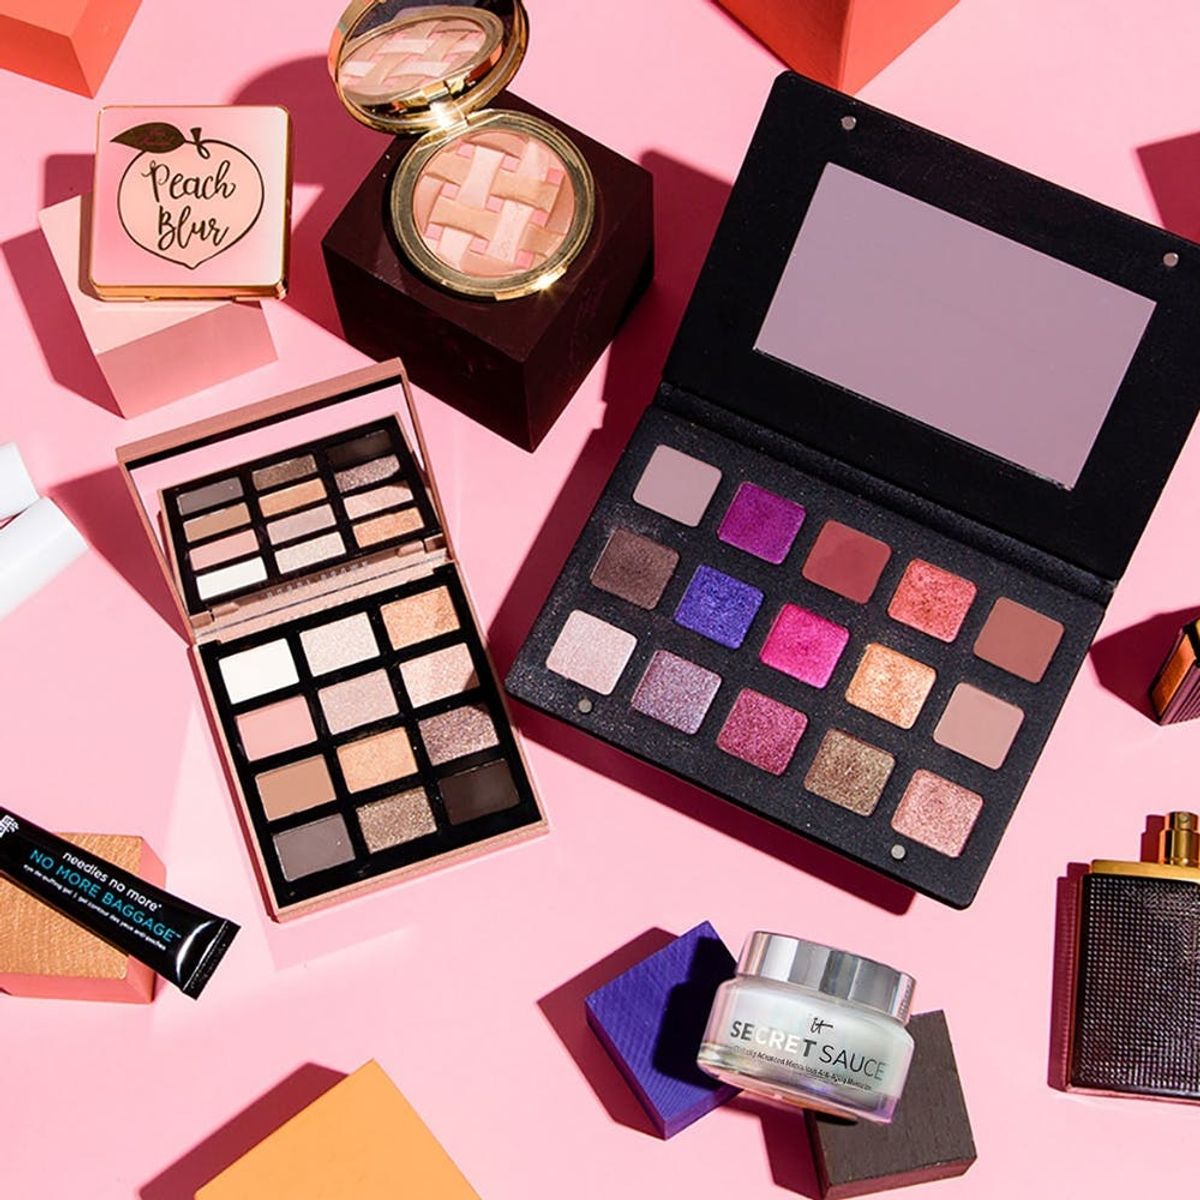 Fall into Beauty With These 10 New Products from Sephora